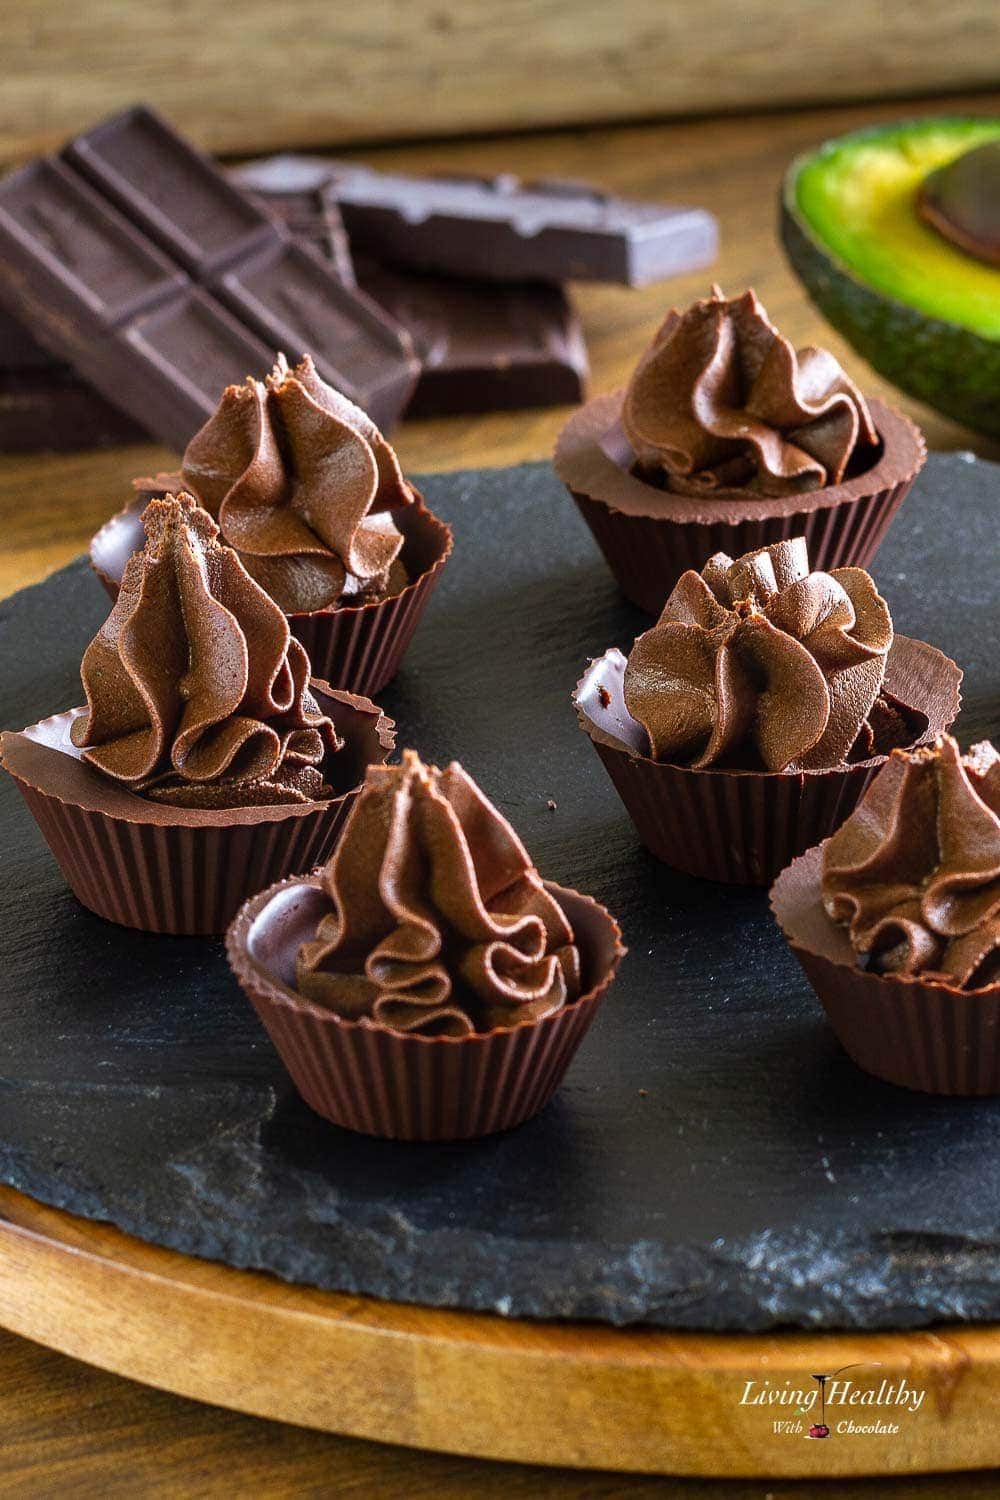 Chocolate Cups filled with a swirl of Avocado Chocolate Mousse.